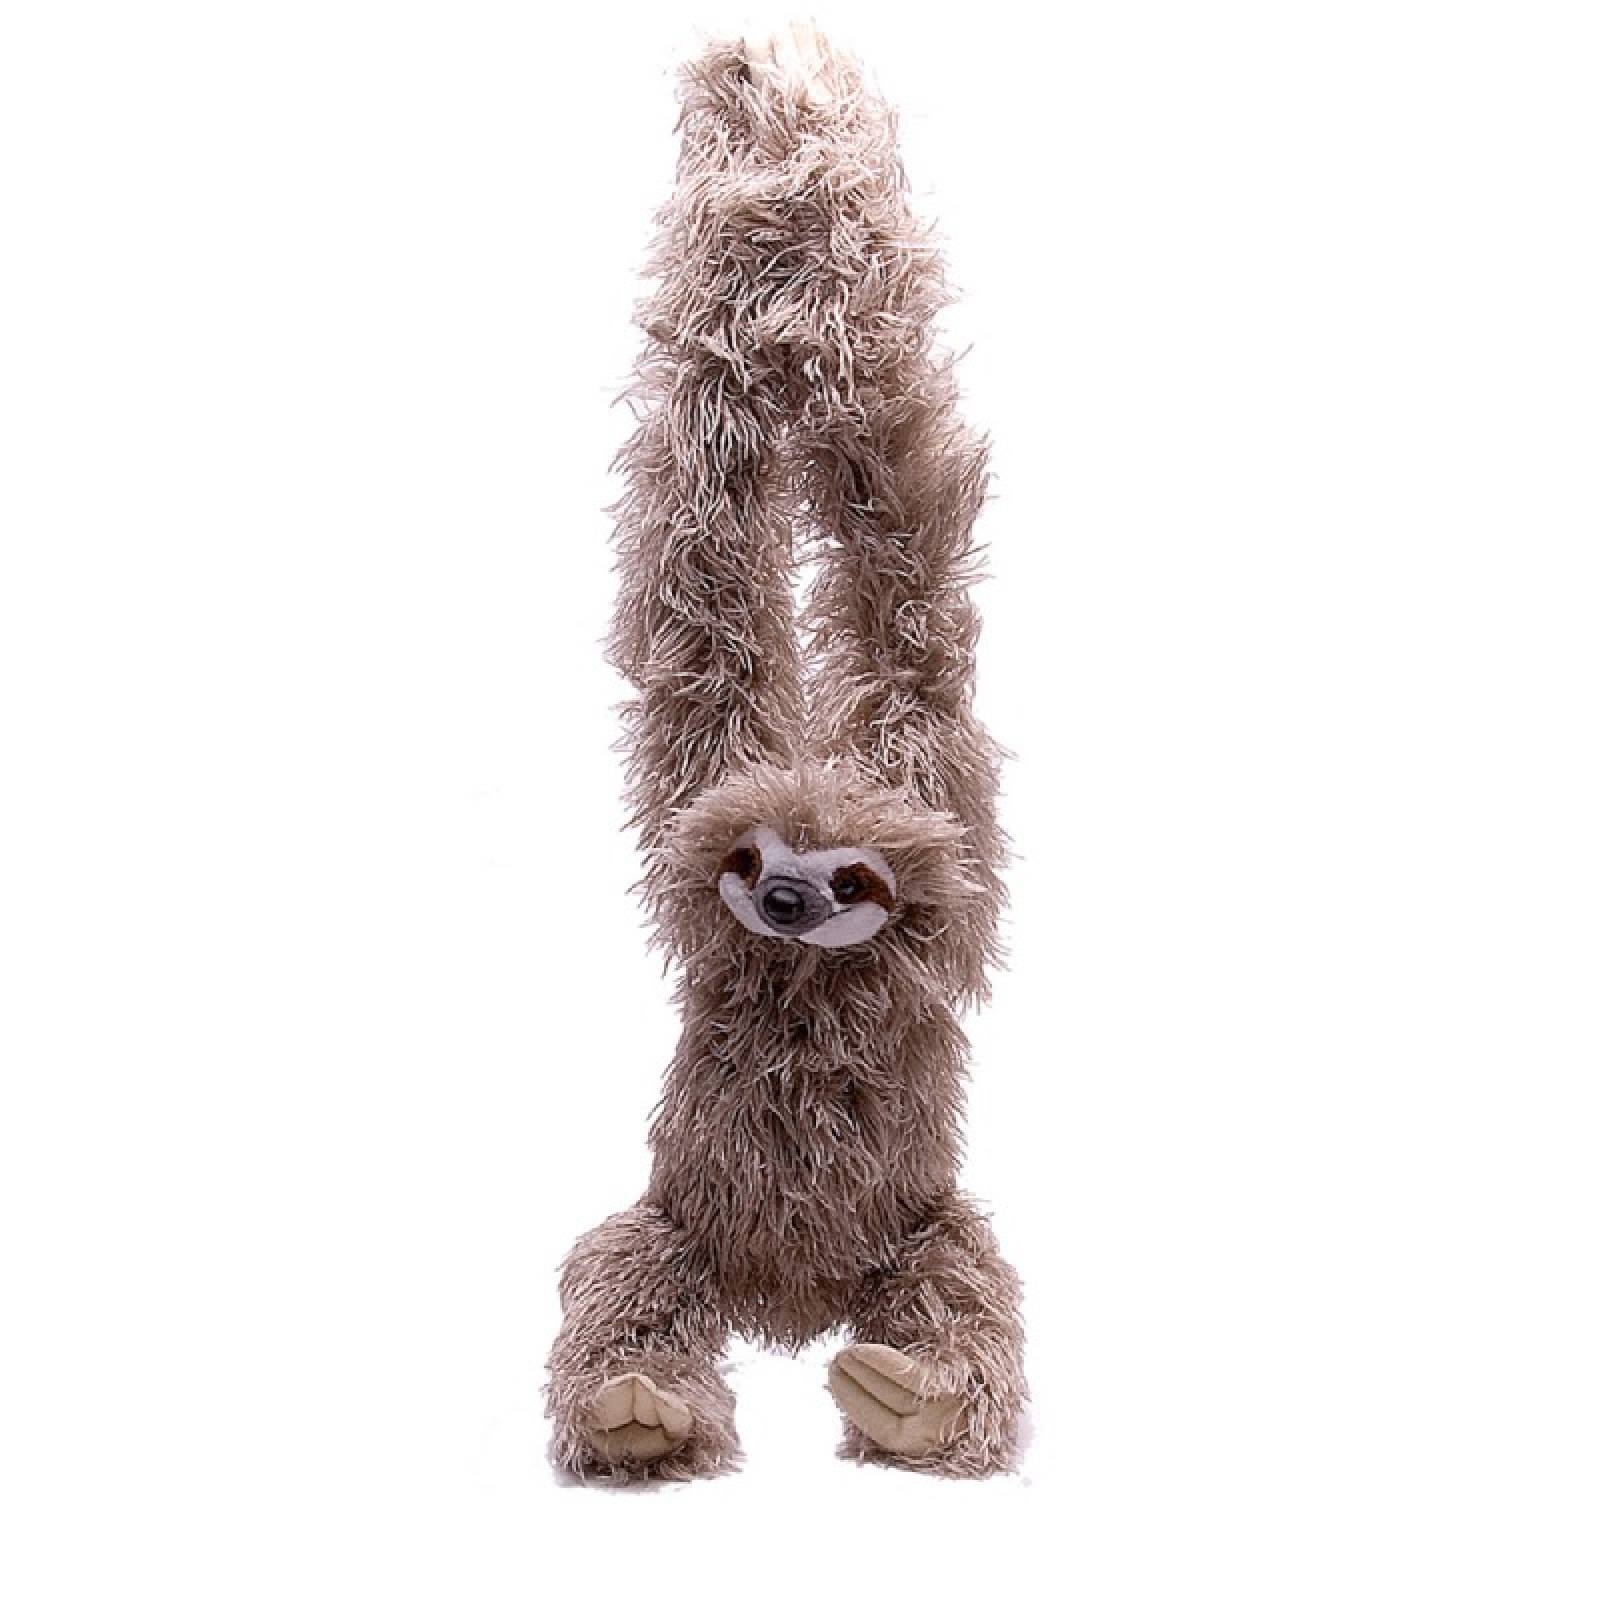 Hanging 3 Toed Sloth Soft Toy